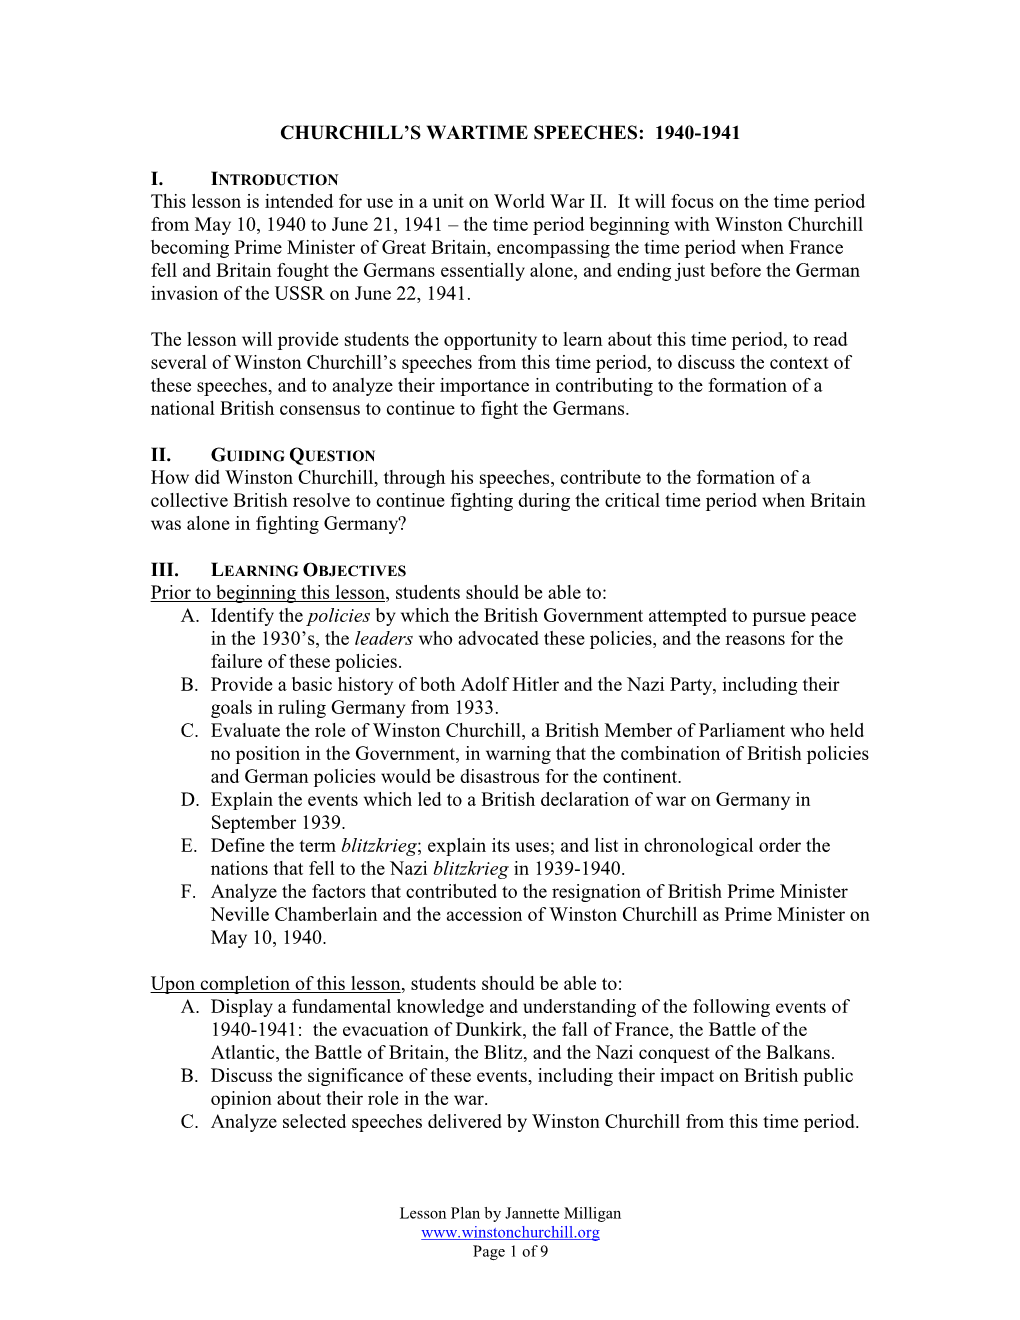 Lesson Plan by Jannette Milligan Page 1 of 9 D